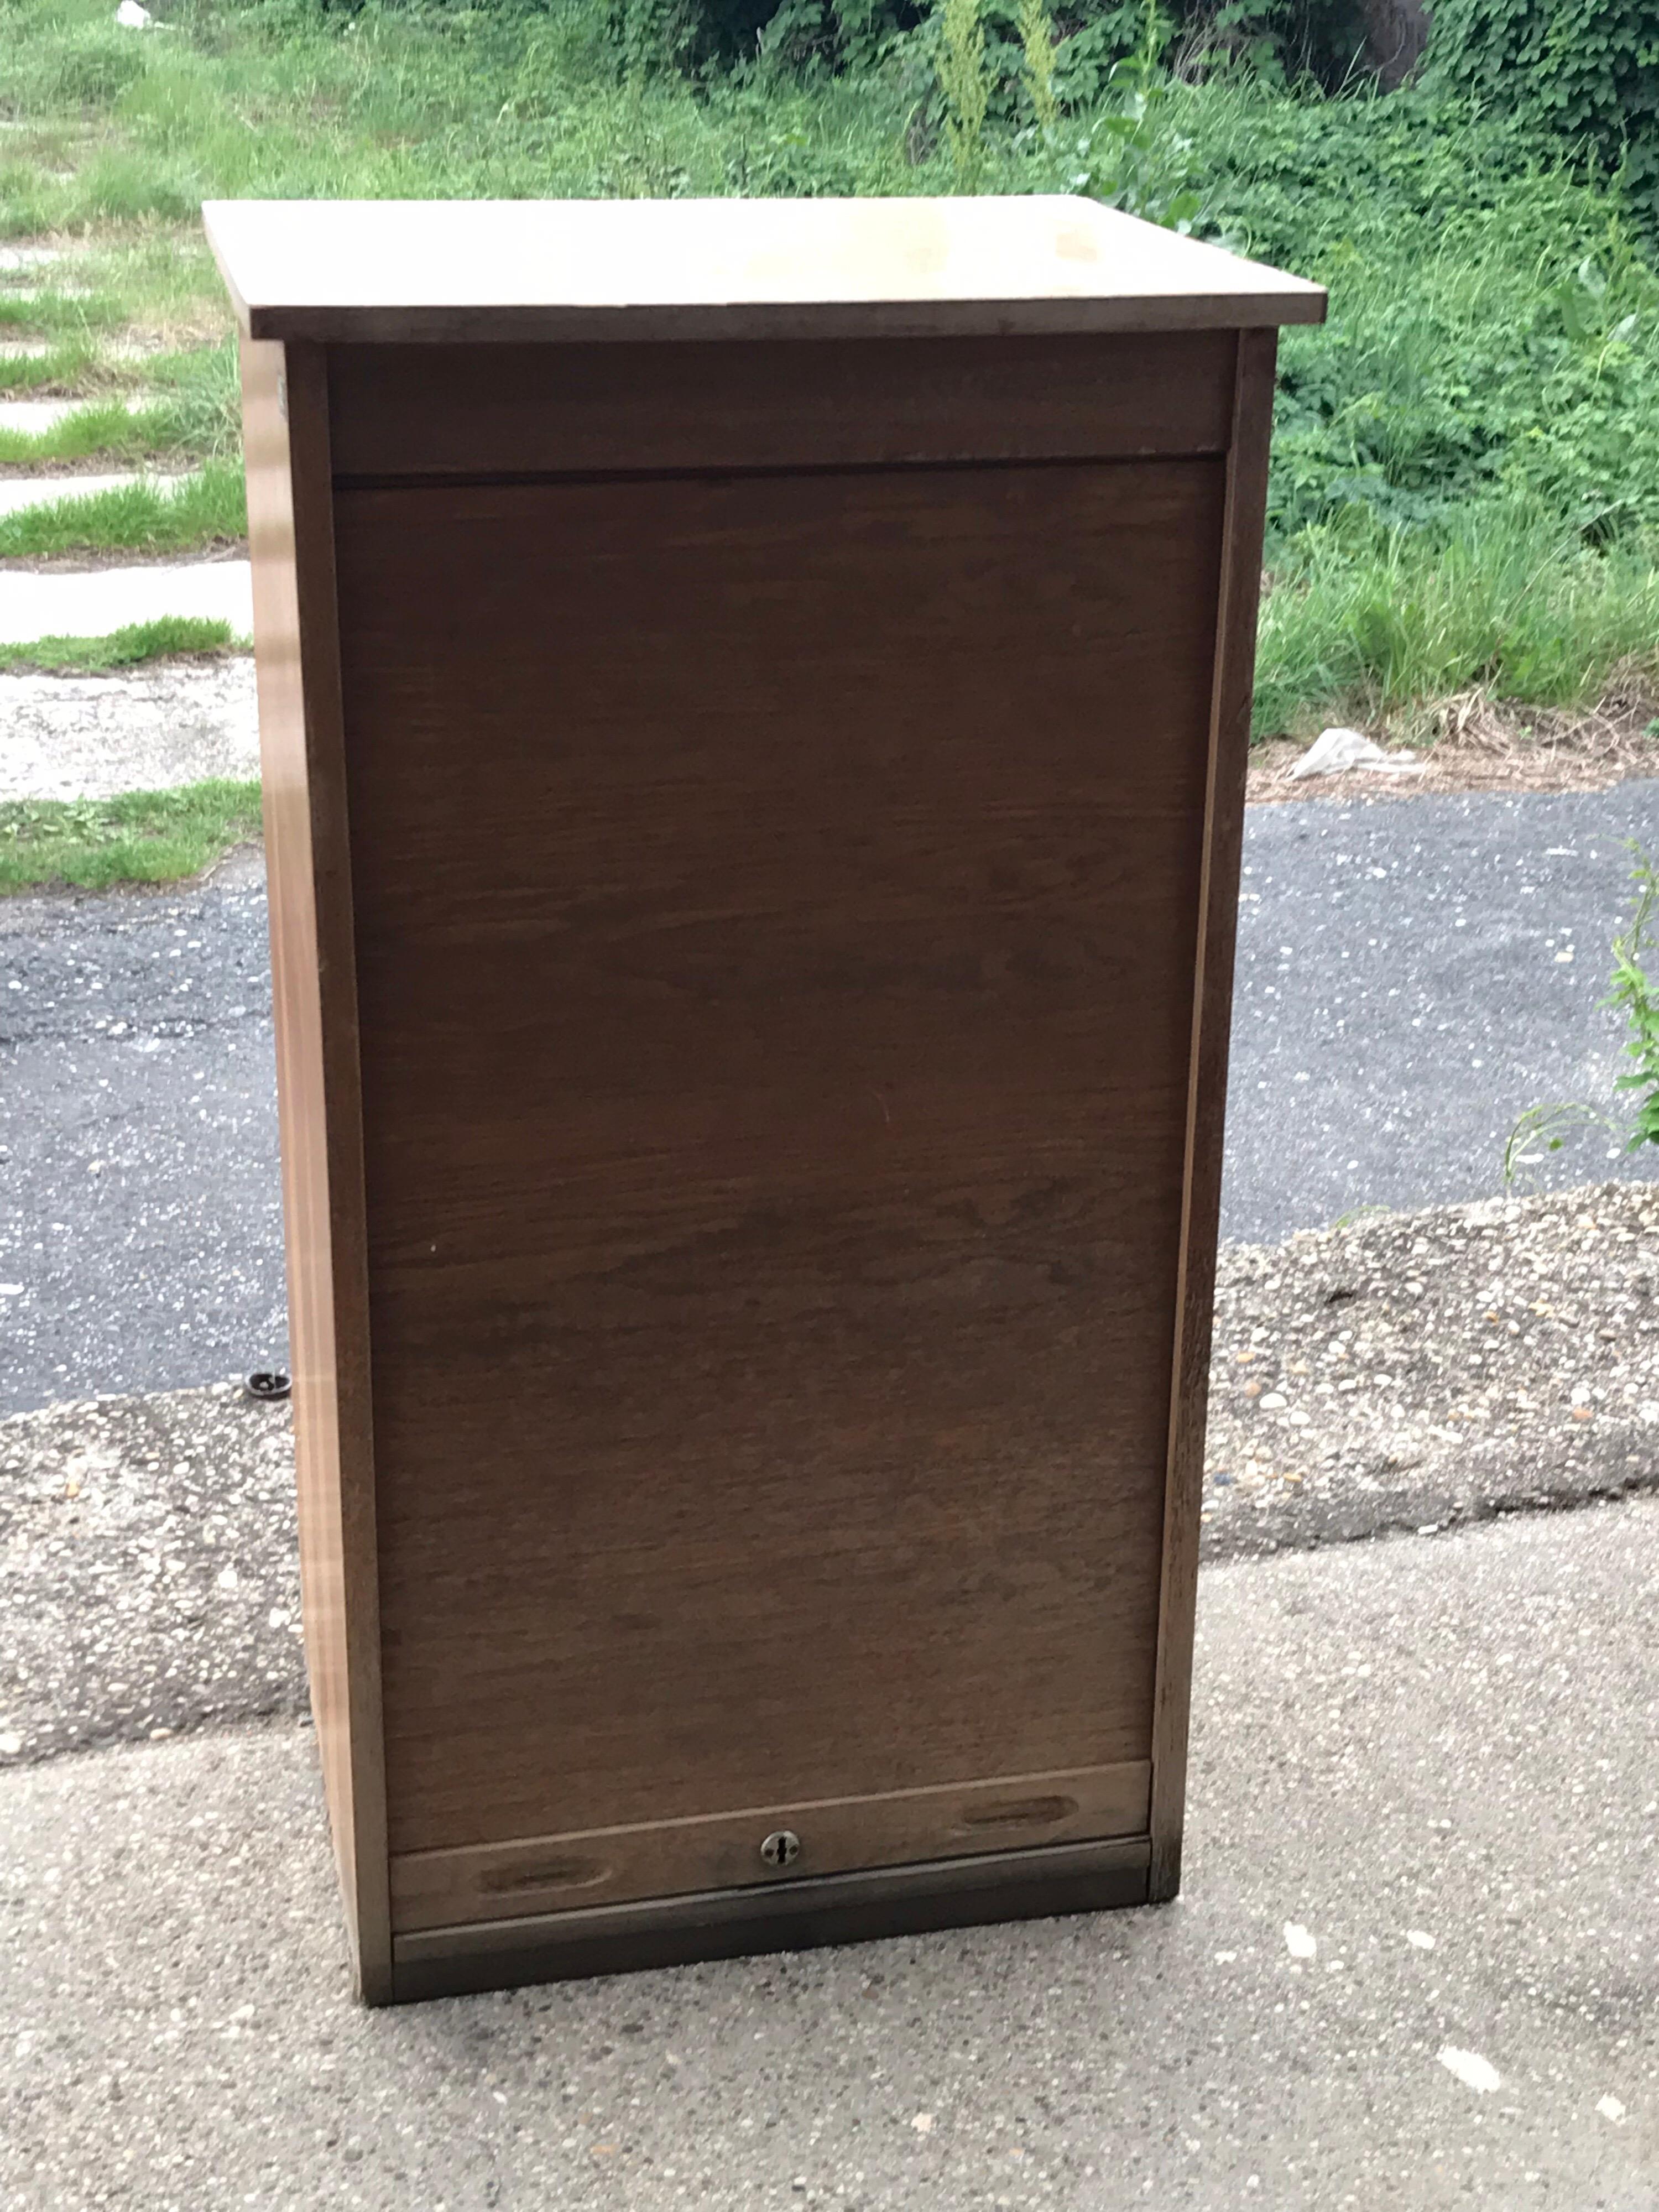 Industrial tambour front cabinet.
Mid-20th century Hungarian Industrial tambour front filing cabinet with adjustable shelving.